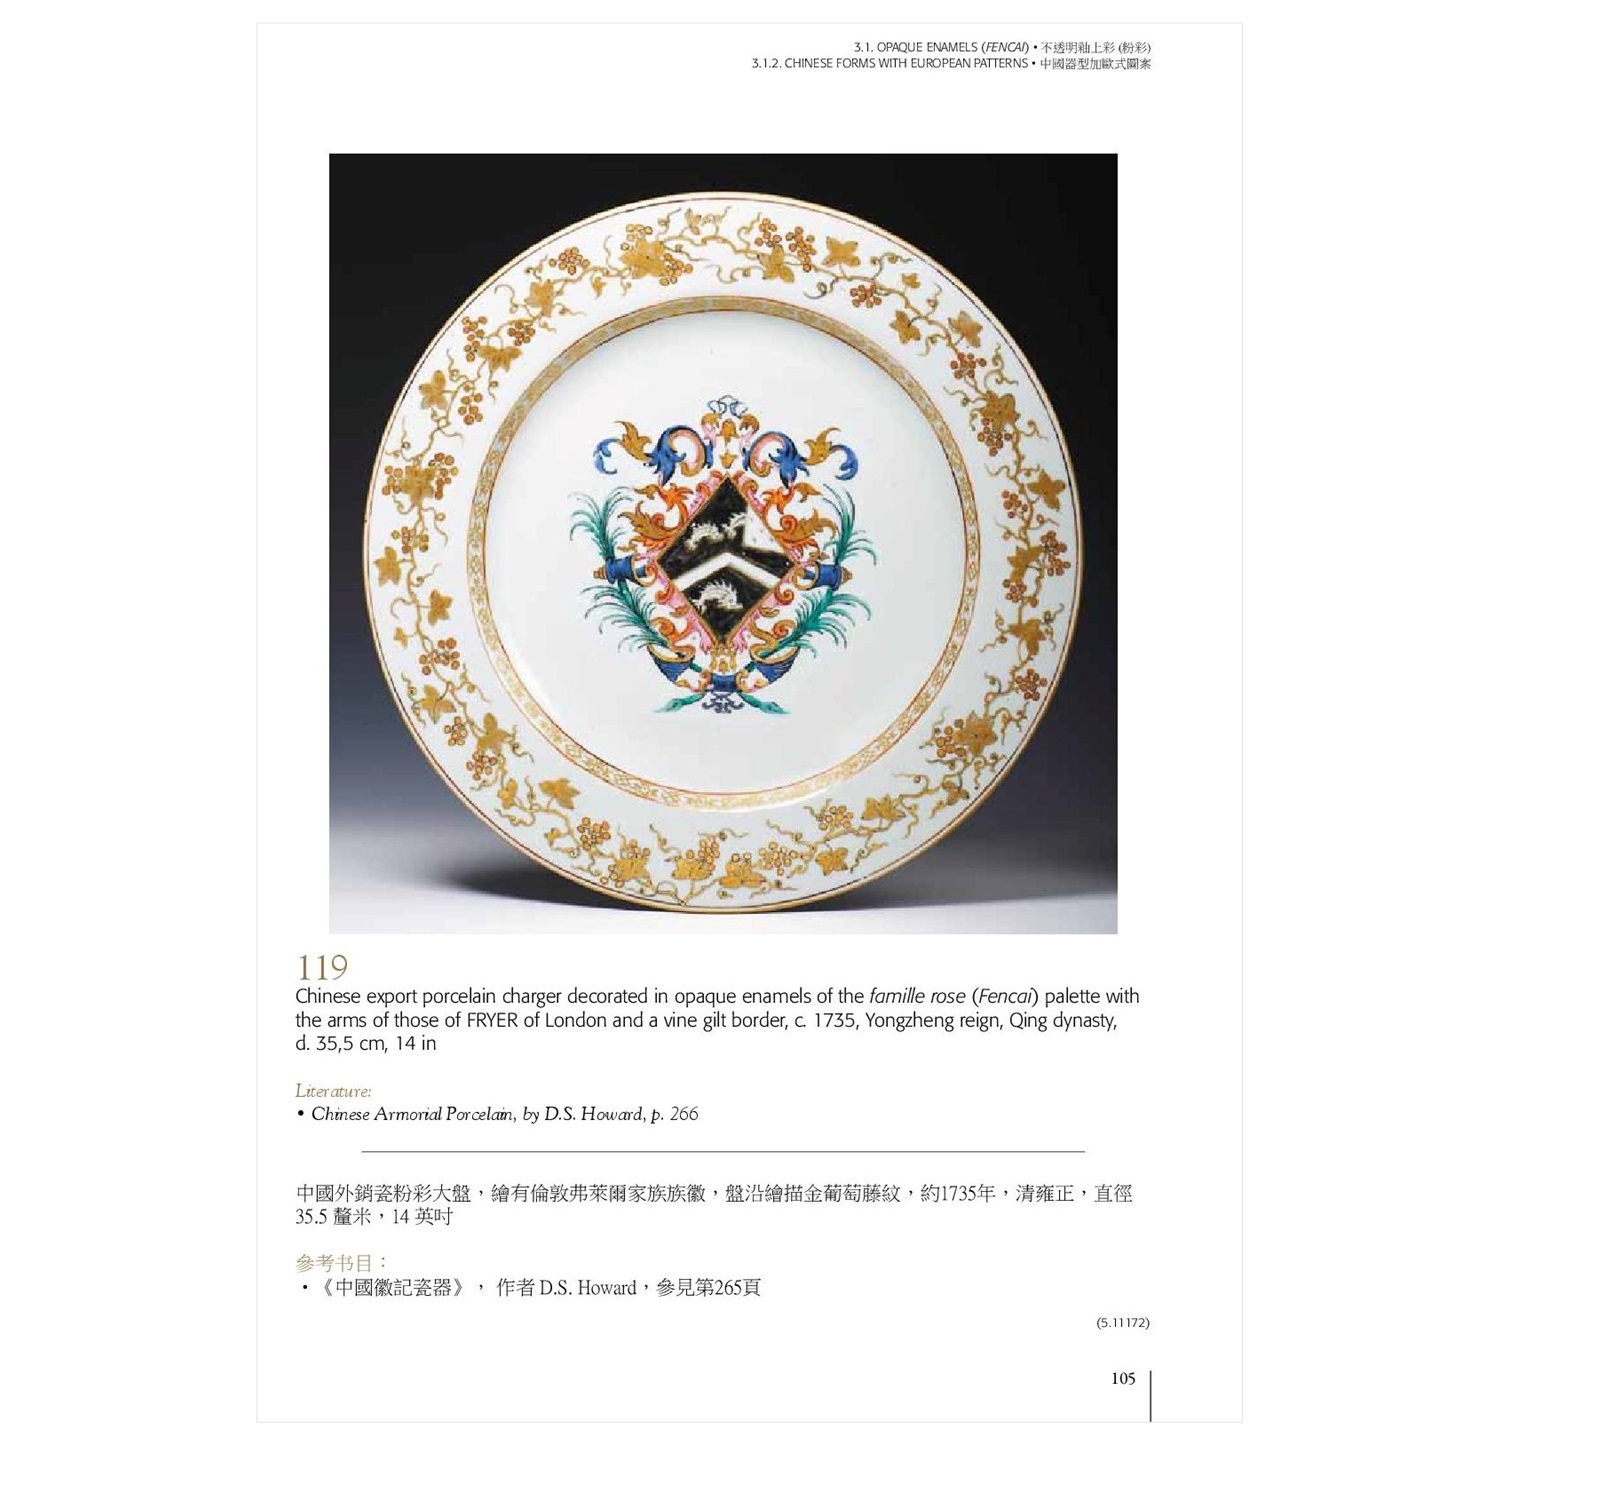 100 YEARS OF CHINESE EXPORT PORCELAIN (1650-1750)